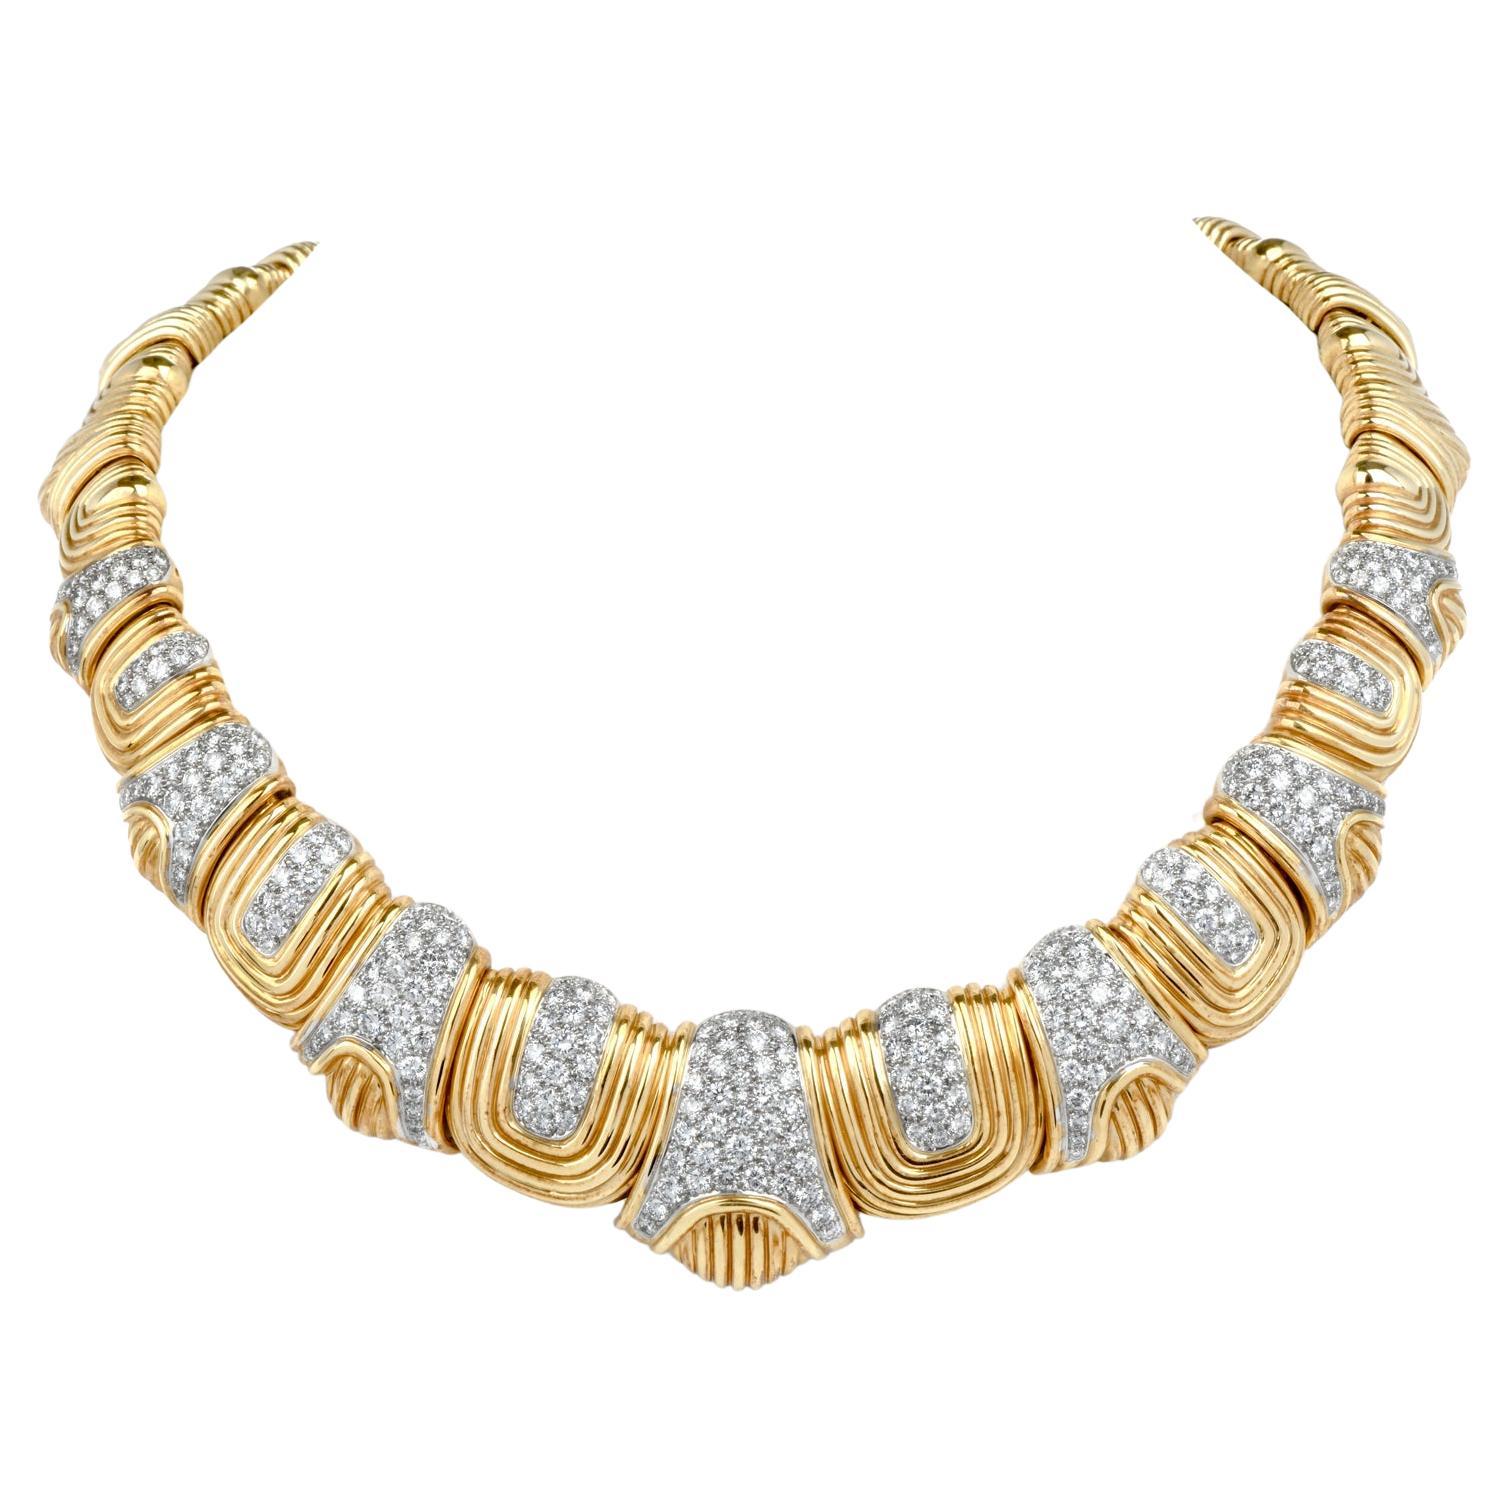 Feel gorgeous in this impressive Vintage early 1980s Diamond 18K Yellow Gold Platinum Link Collar Necklace.

A channeled design graciously added to the gold link, will adorn the collar bone of the wearer.

This exquisite necklace weighs an